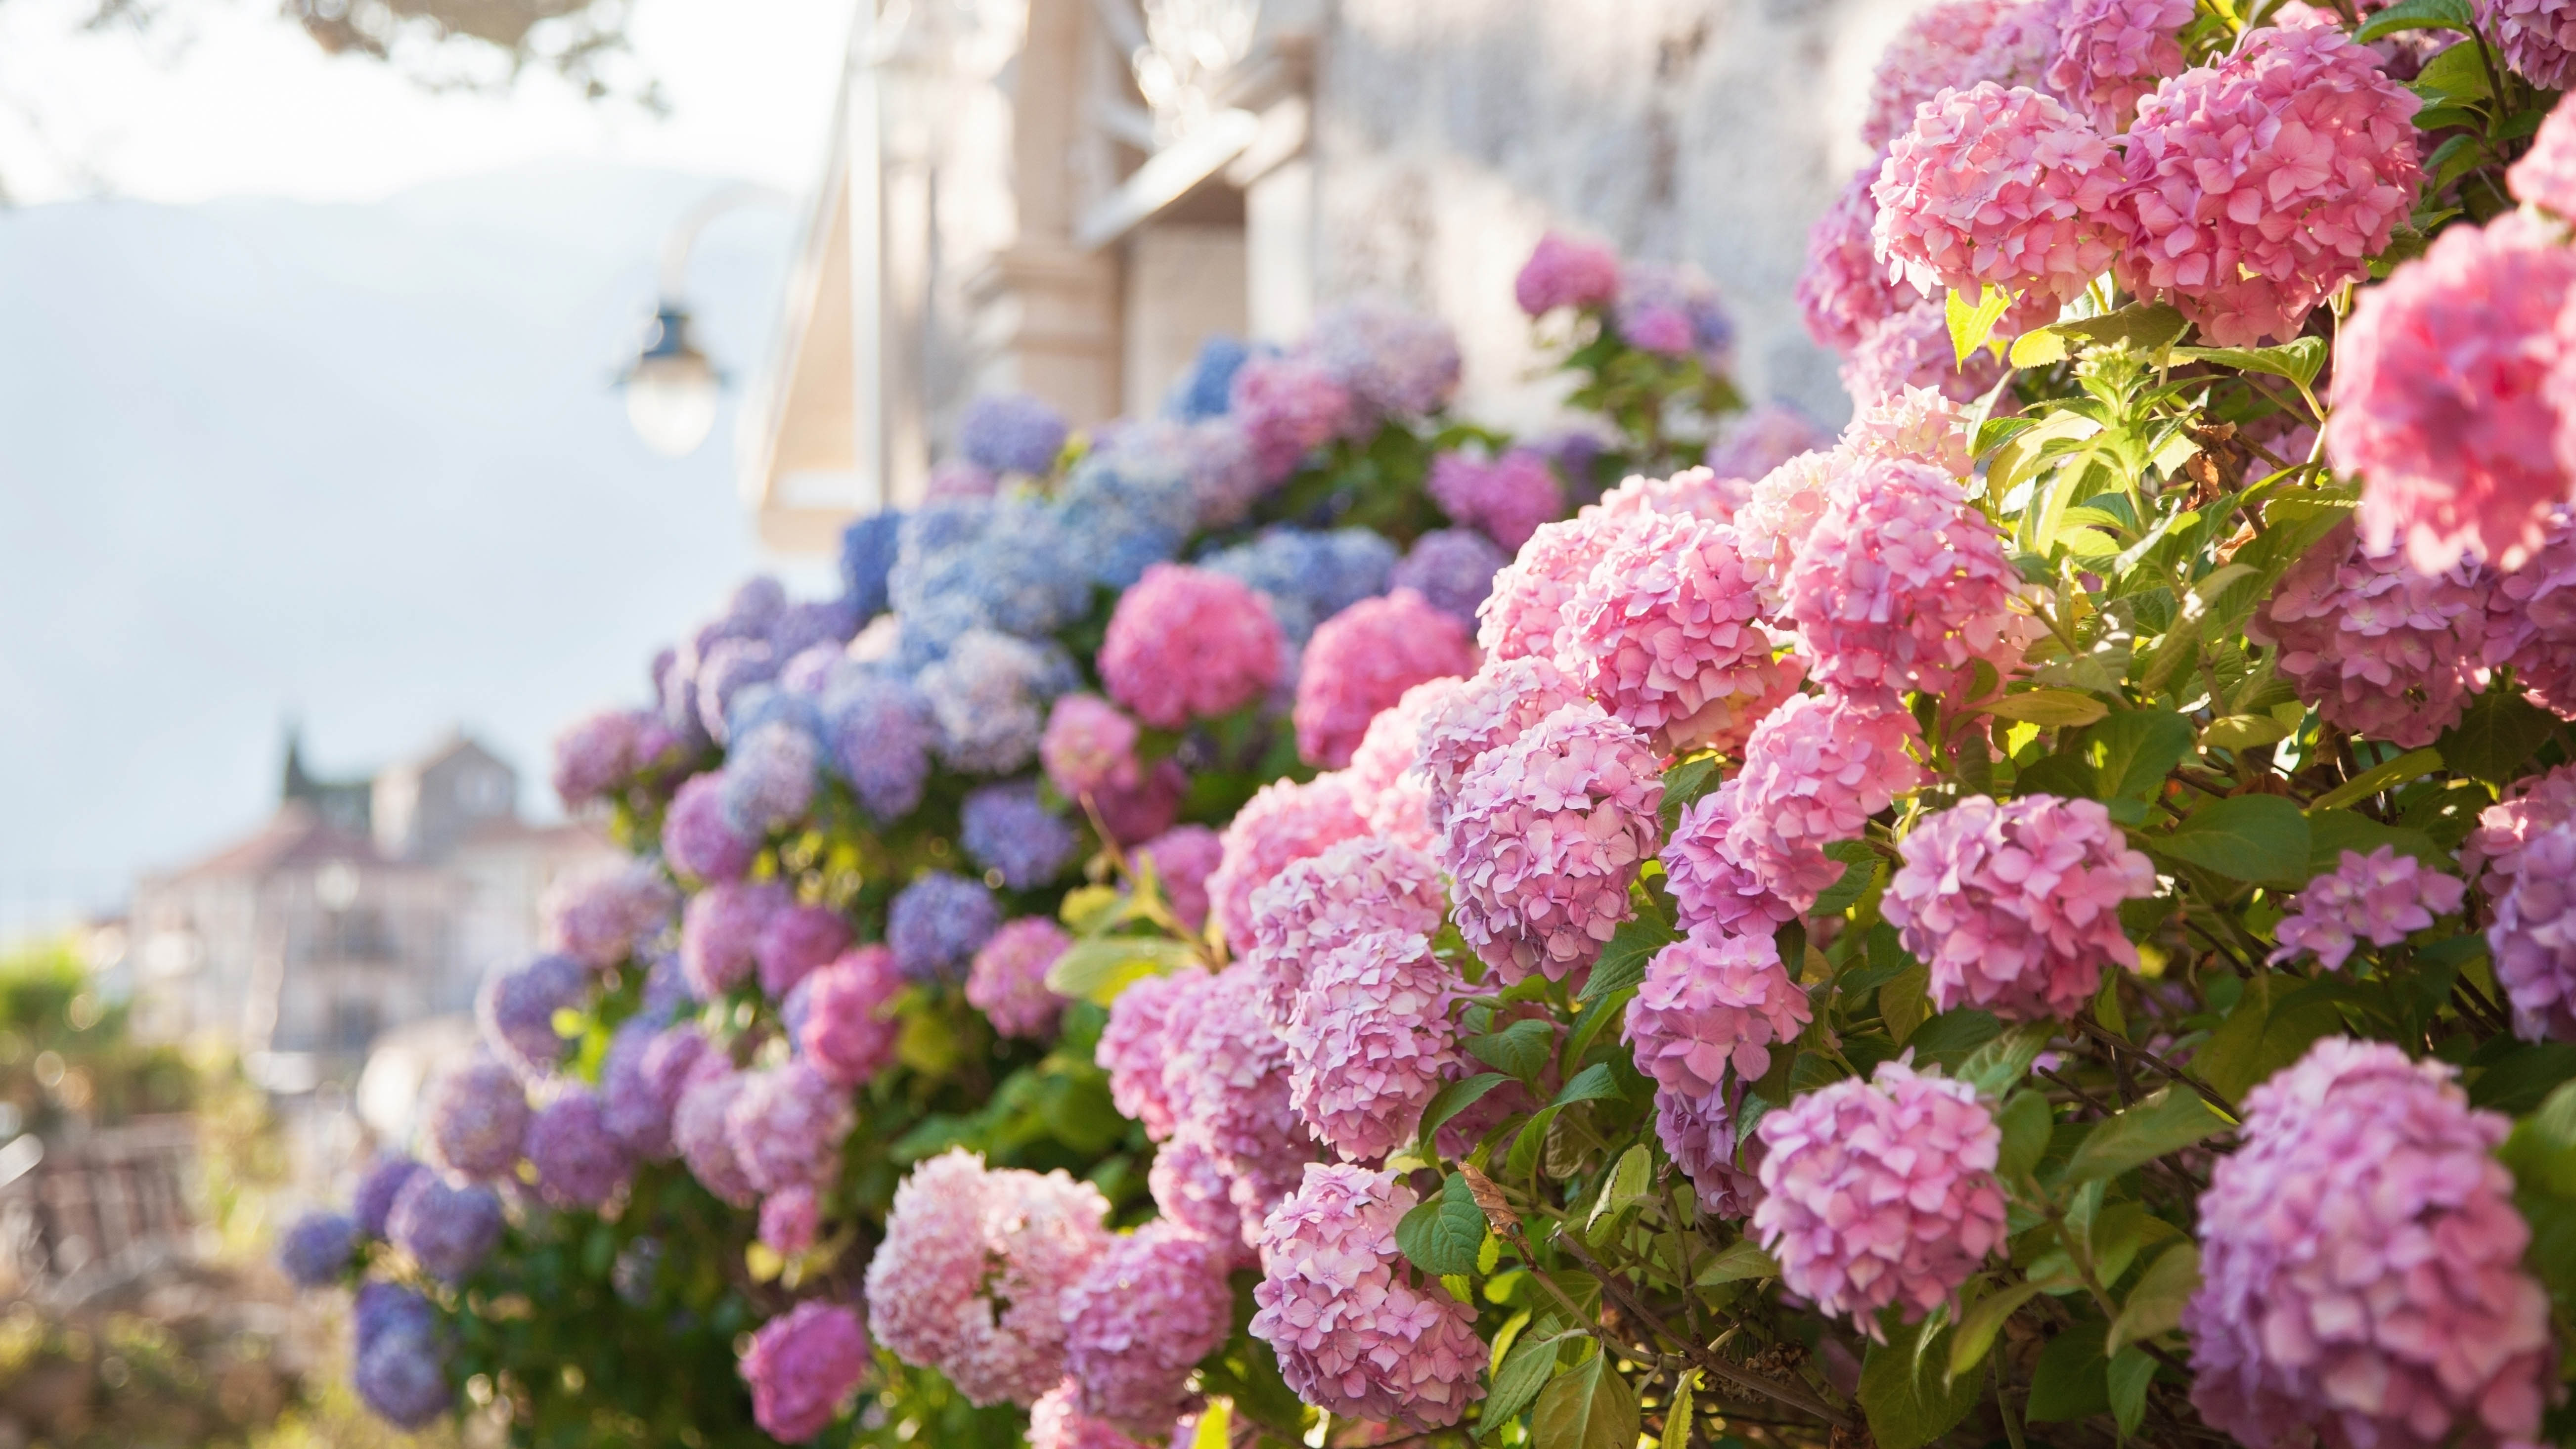 How to change the color of hydrangeas